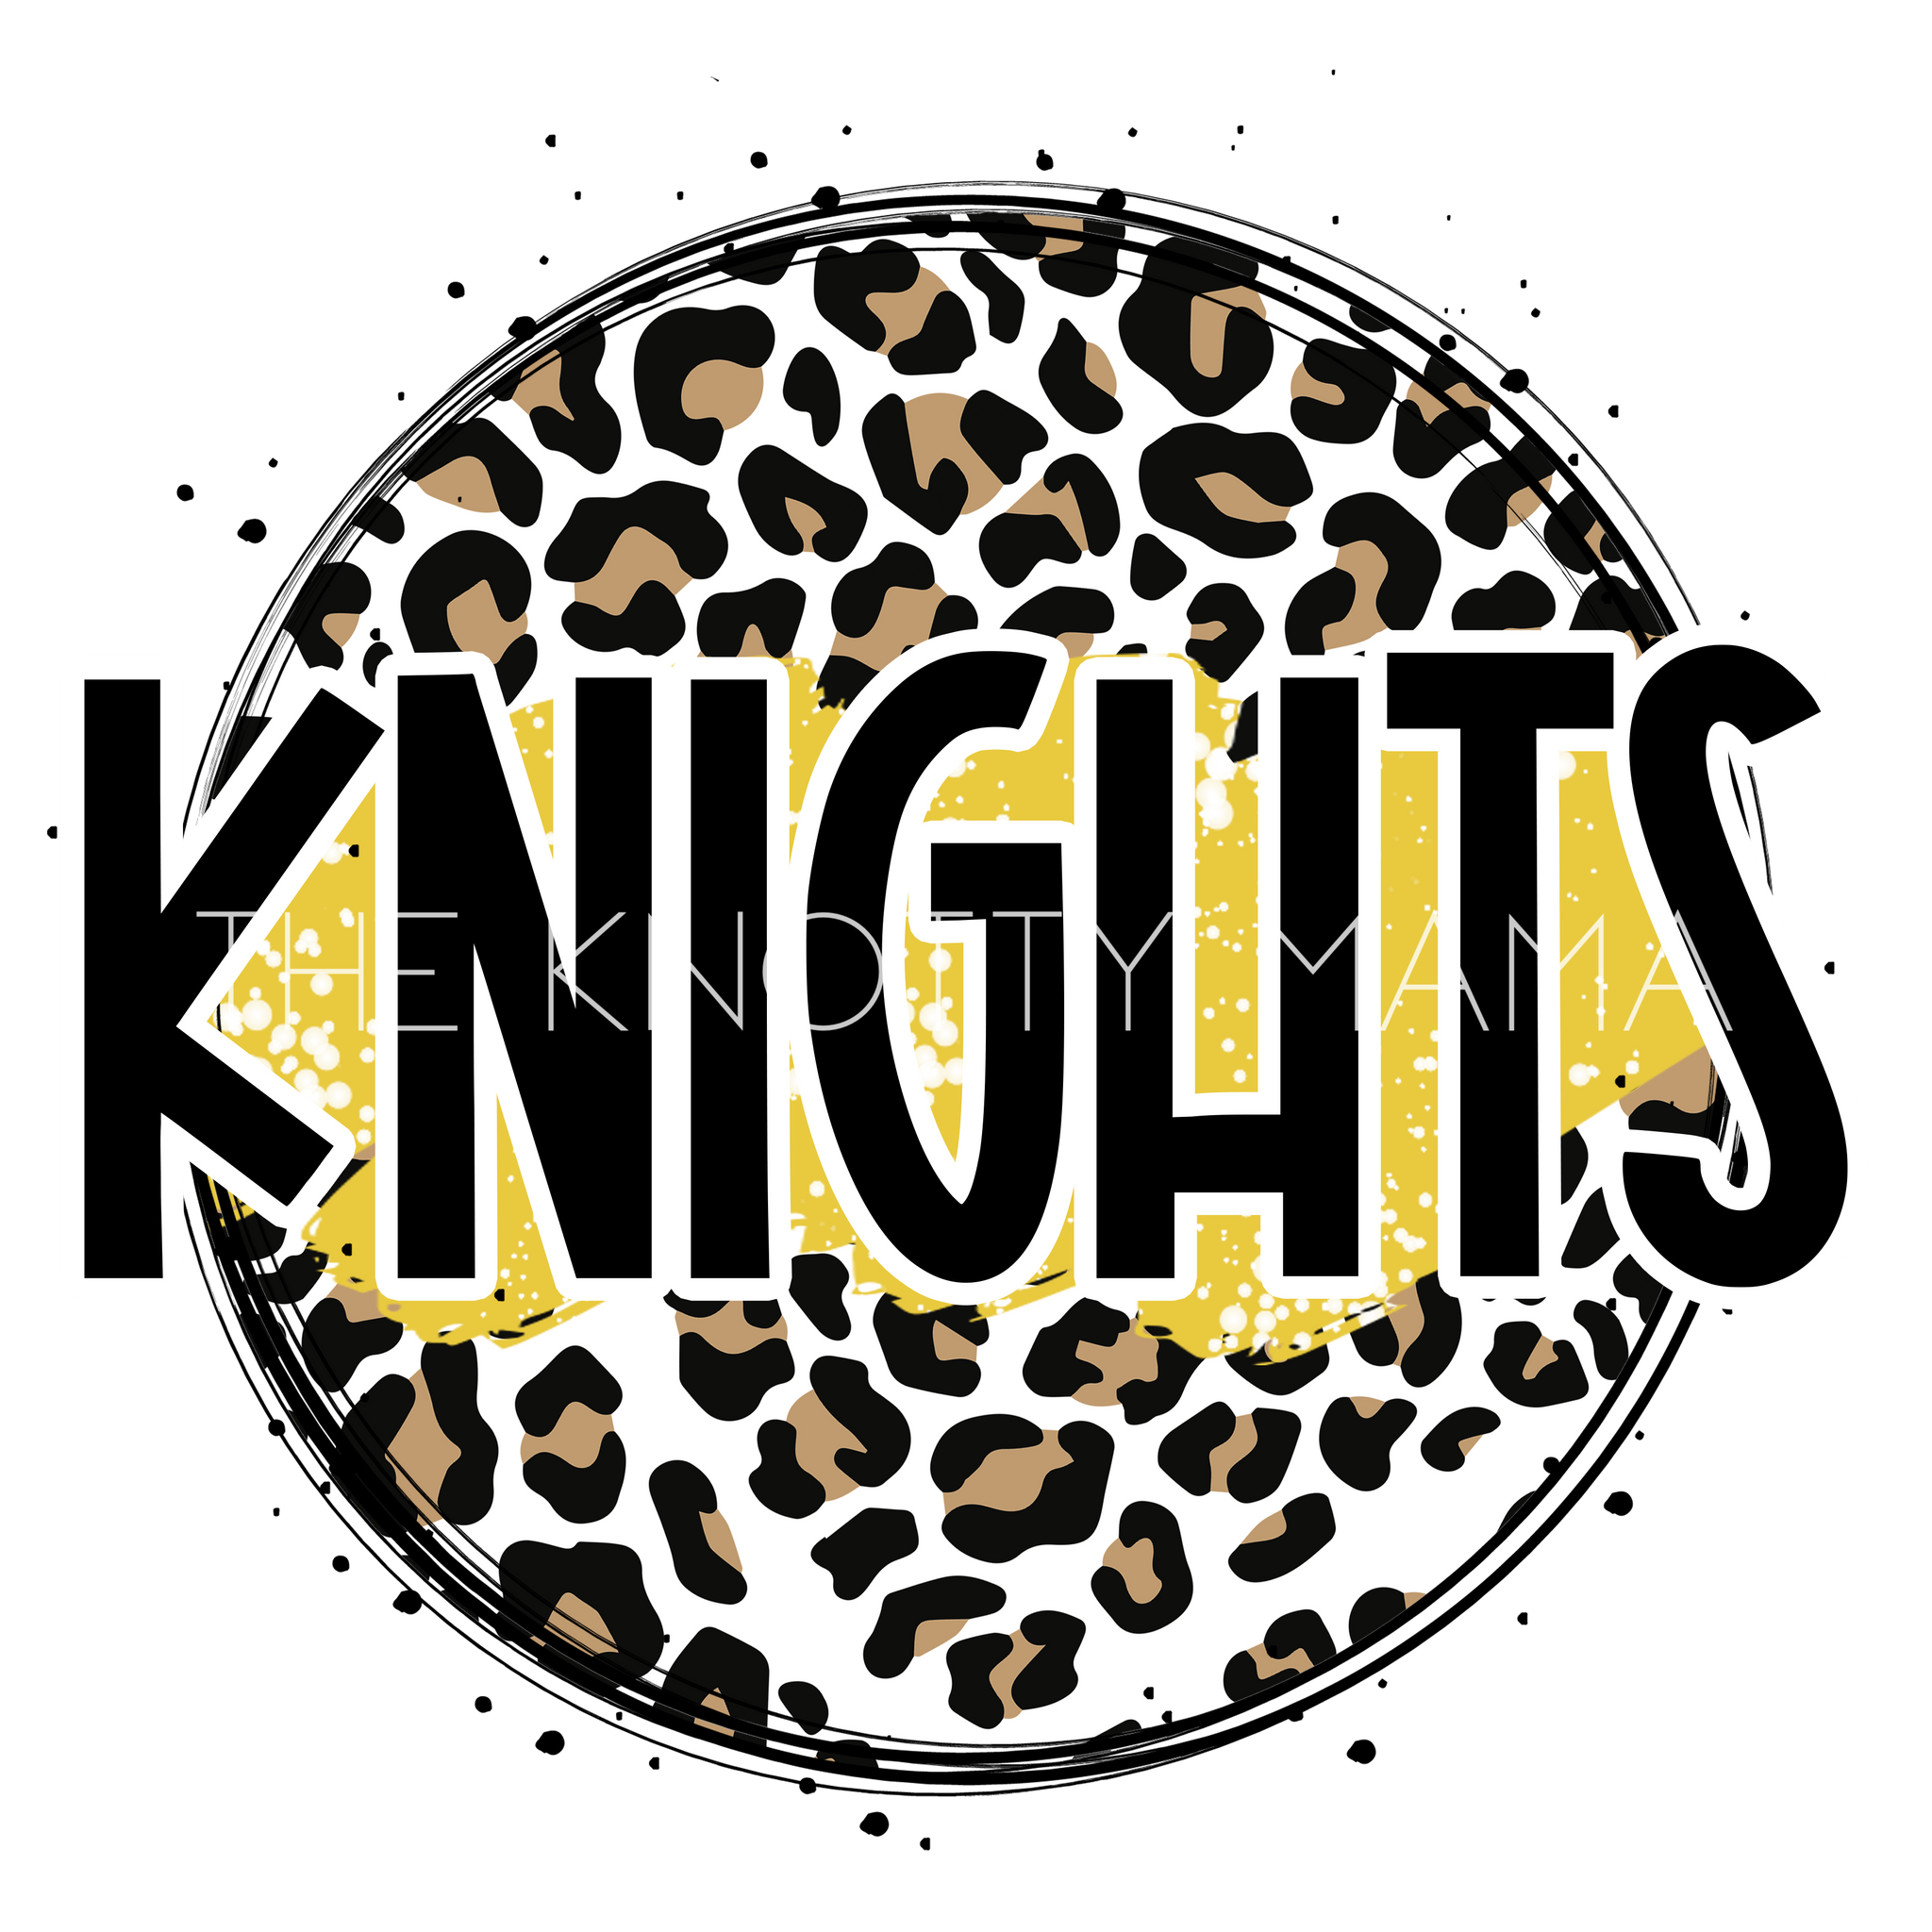 Knights Yellow - Leopard Circle PNG